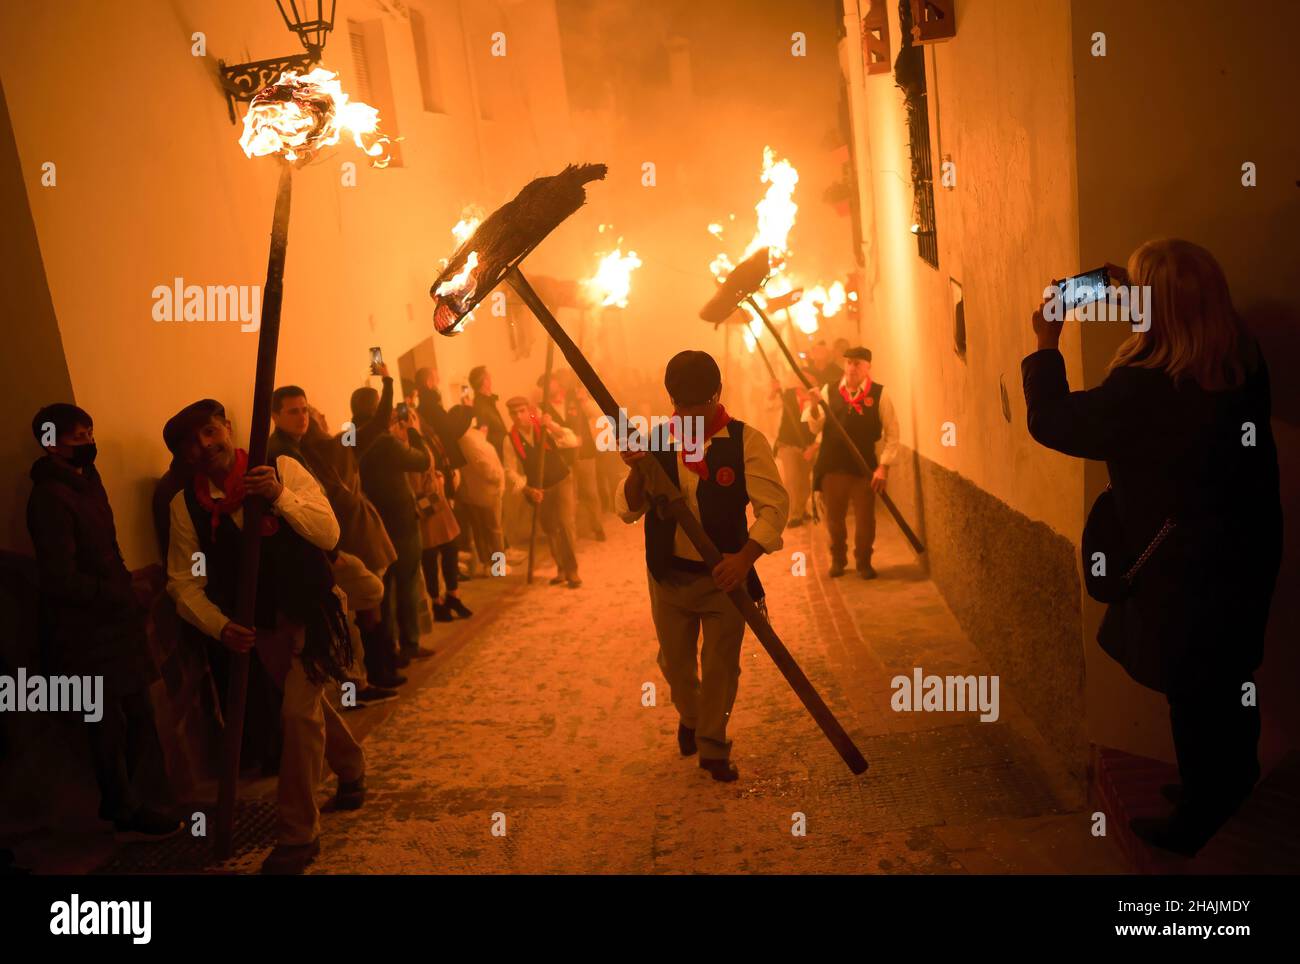 A villager is seen holding a torch as he takes part in the celebration of the 'Divina Pastora' Virgin procession. On the eve of the feast of St. Lucia in the small village of Casarabonela, every night of 12 December during Christmas season villagers take part in the ancient celebration of 'Los Rondeles' carrying burning wickers baskets (also known as 'rondeles') soaked in oil. Along the streets, the Virgin of 'Los Rondeles' is honoured by the devotees in a ritual of light and fire as thanksgiving for the harvest obtained. Stock Photo